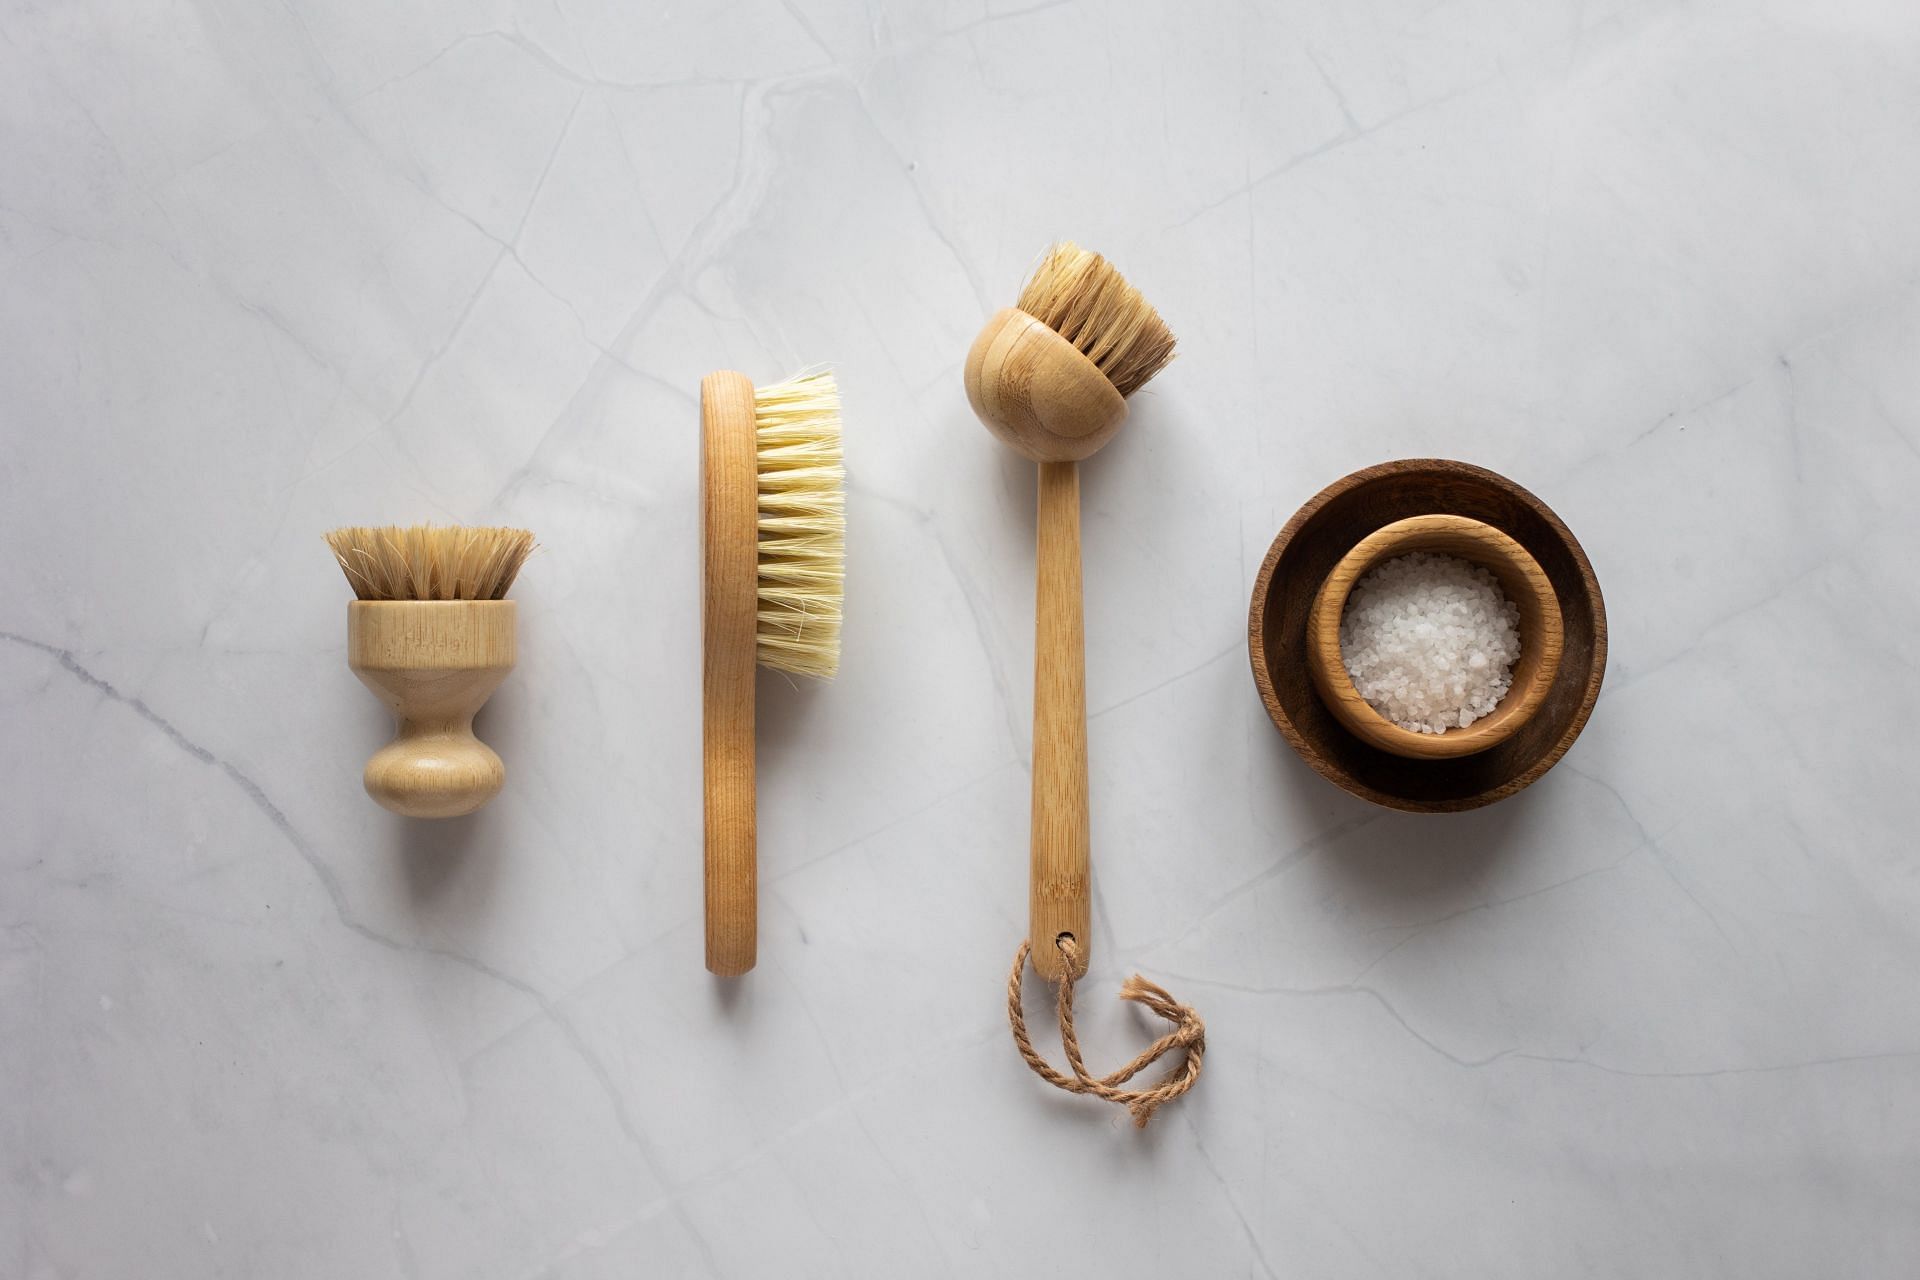 Choosing the right brush is crucial in the dry brush technique. (Image via Pexels/Monstera)